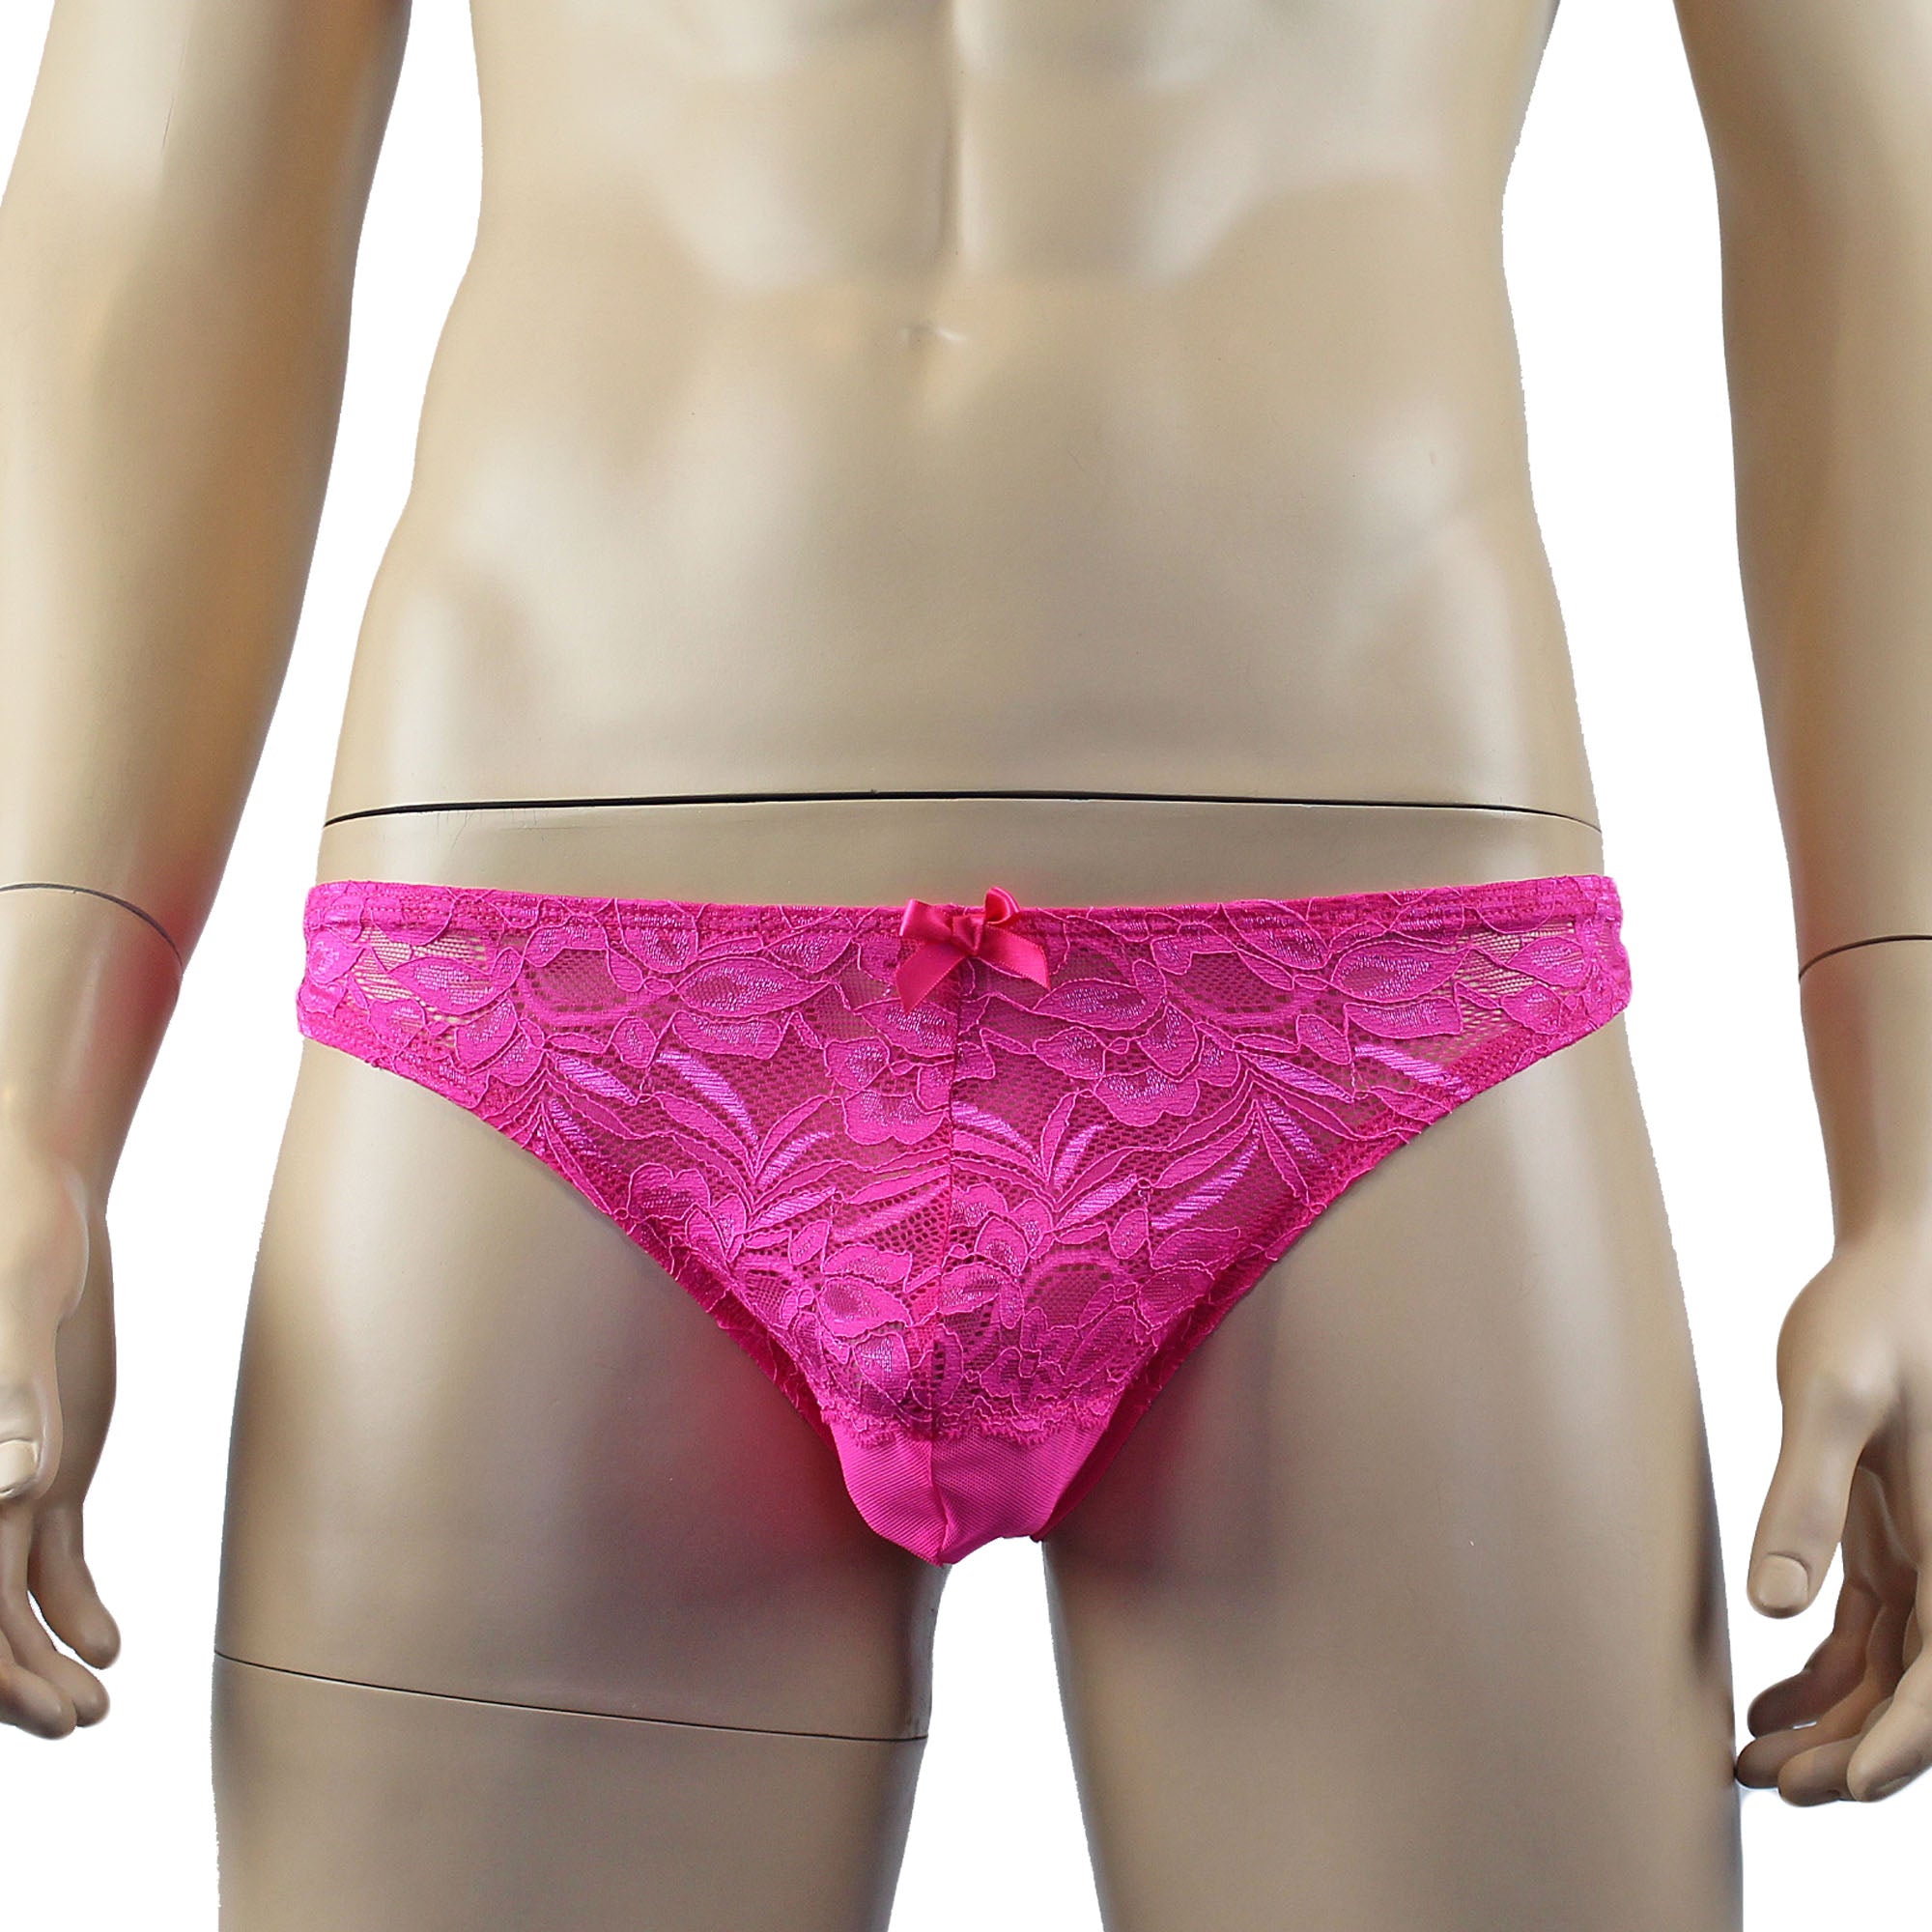 Mens Kristy Lace & Mesh Bra Top and Thong Panty Hot Pink